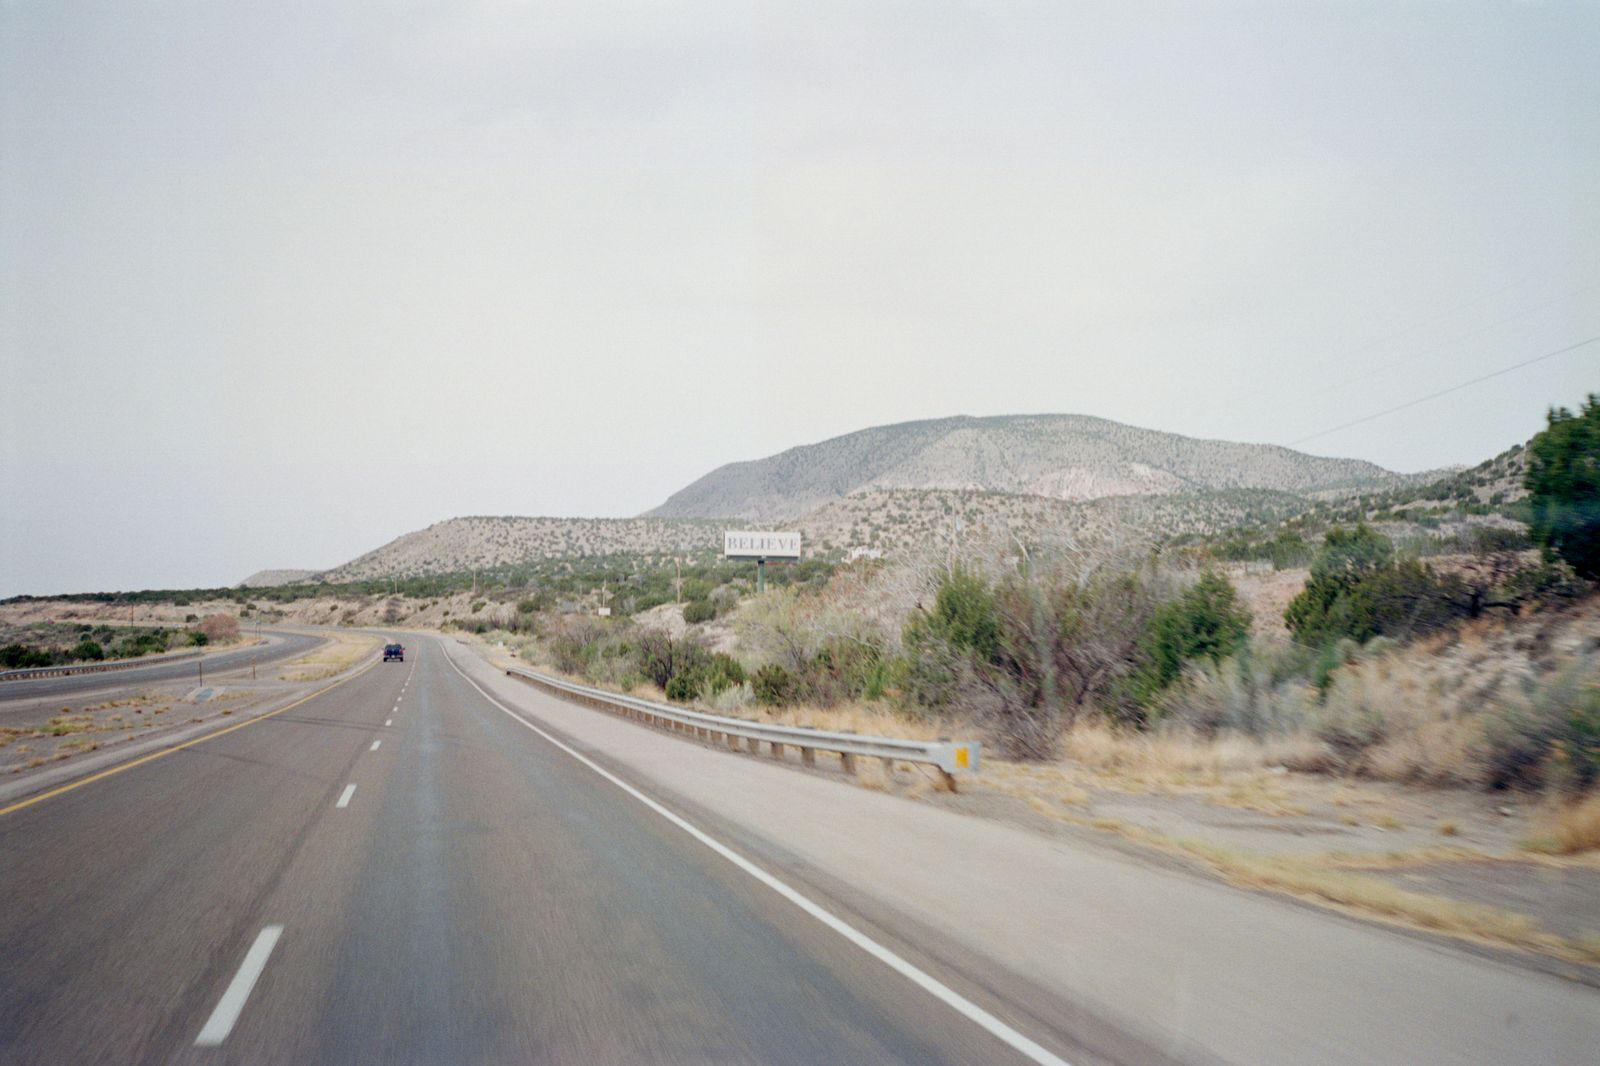 © Louise Amelie - "Believe" Rosswell, New Mexico.